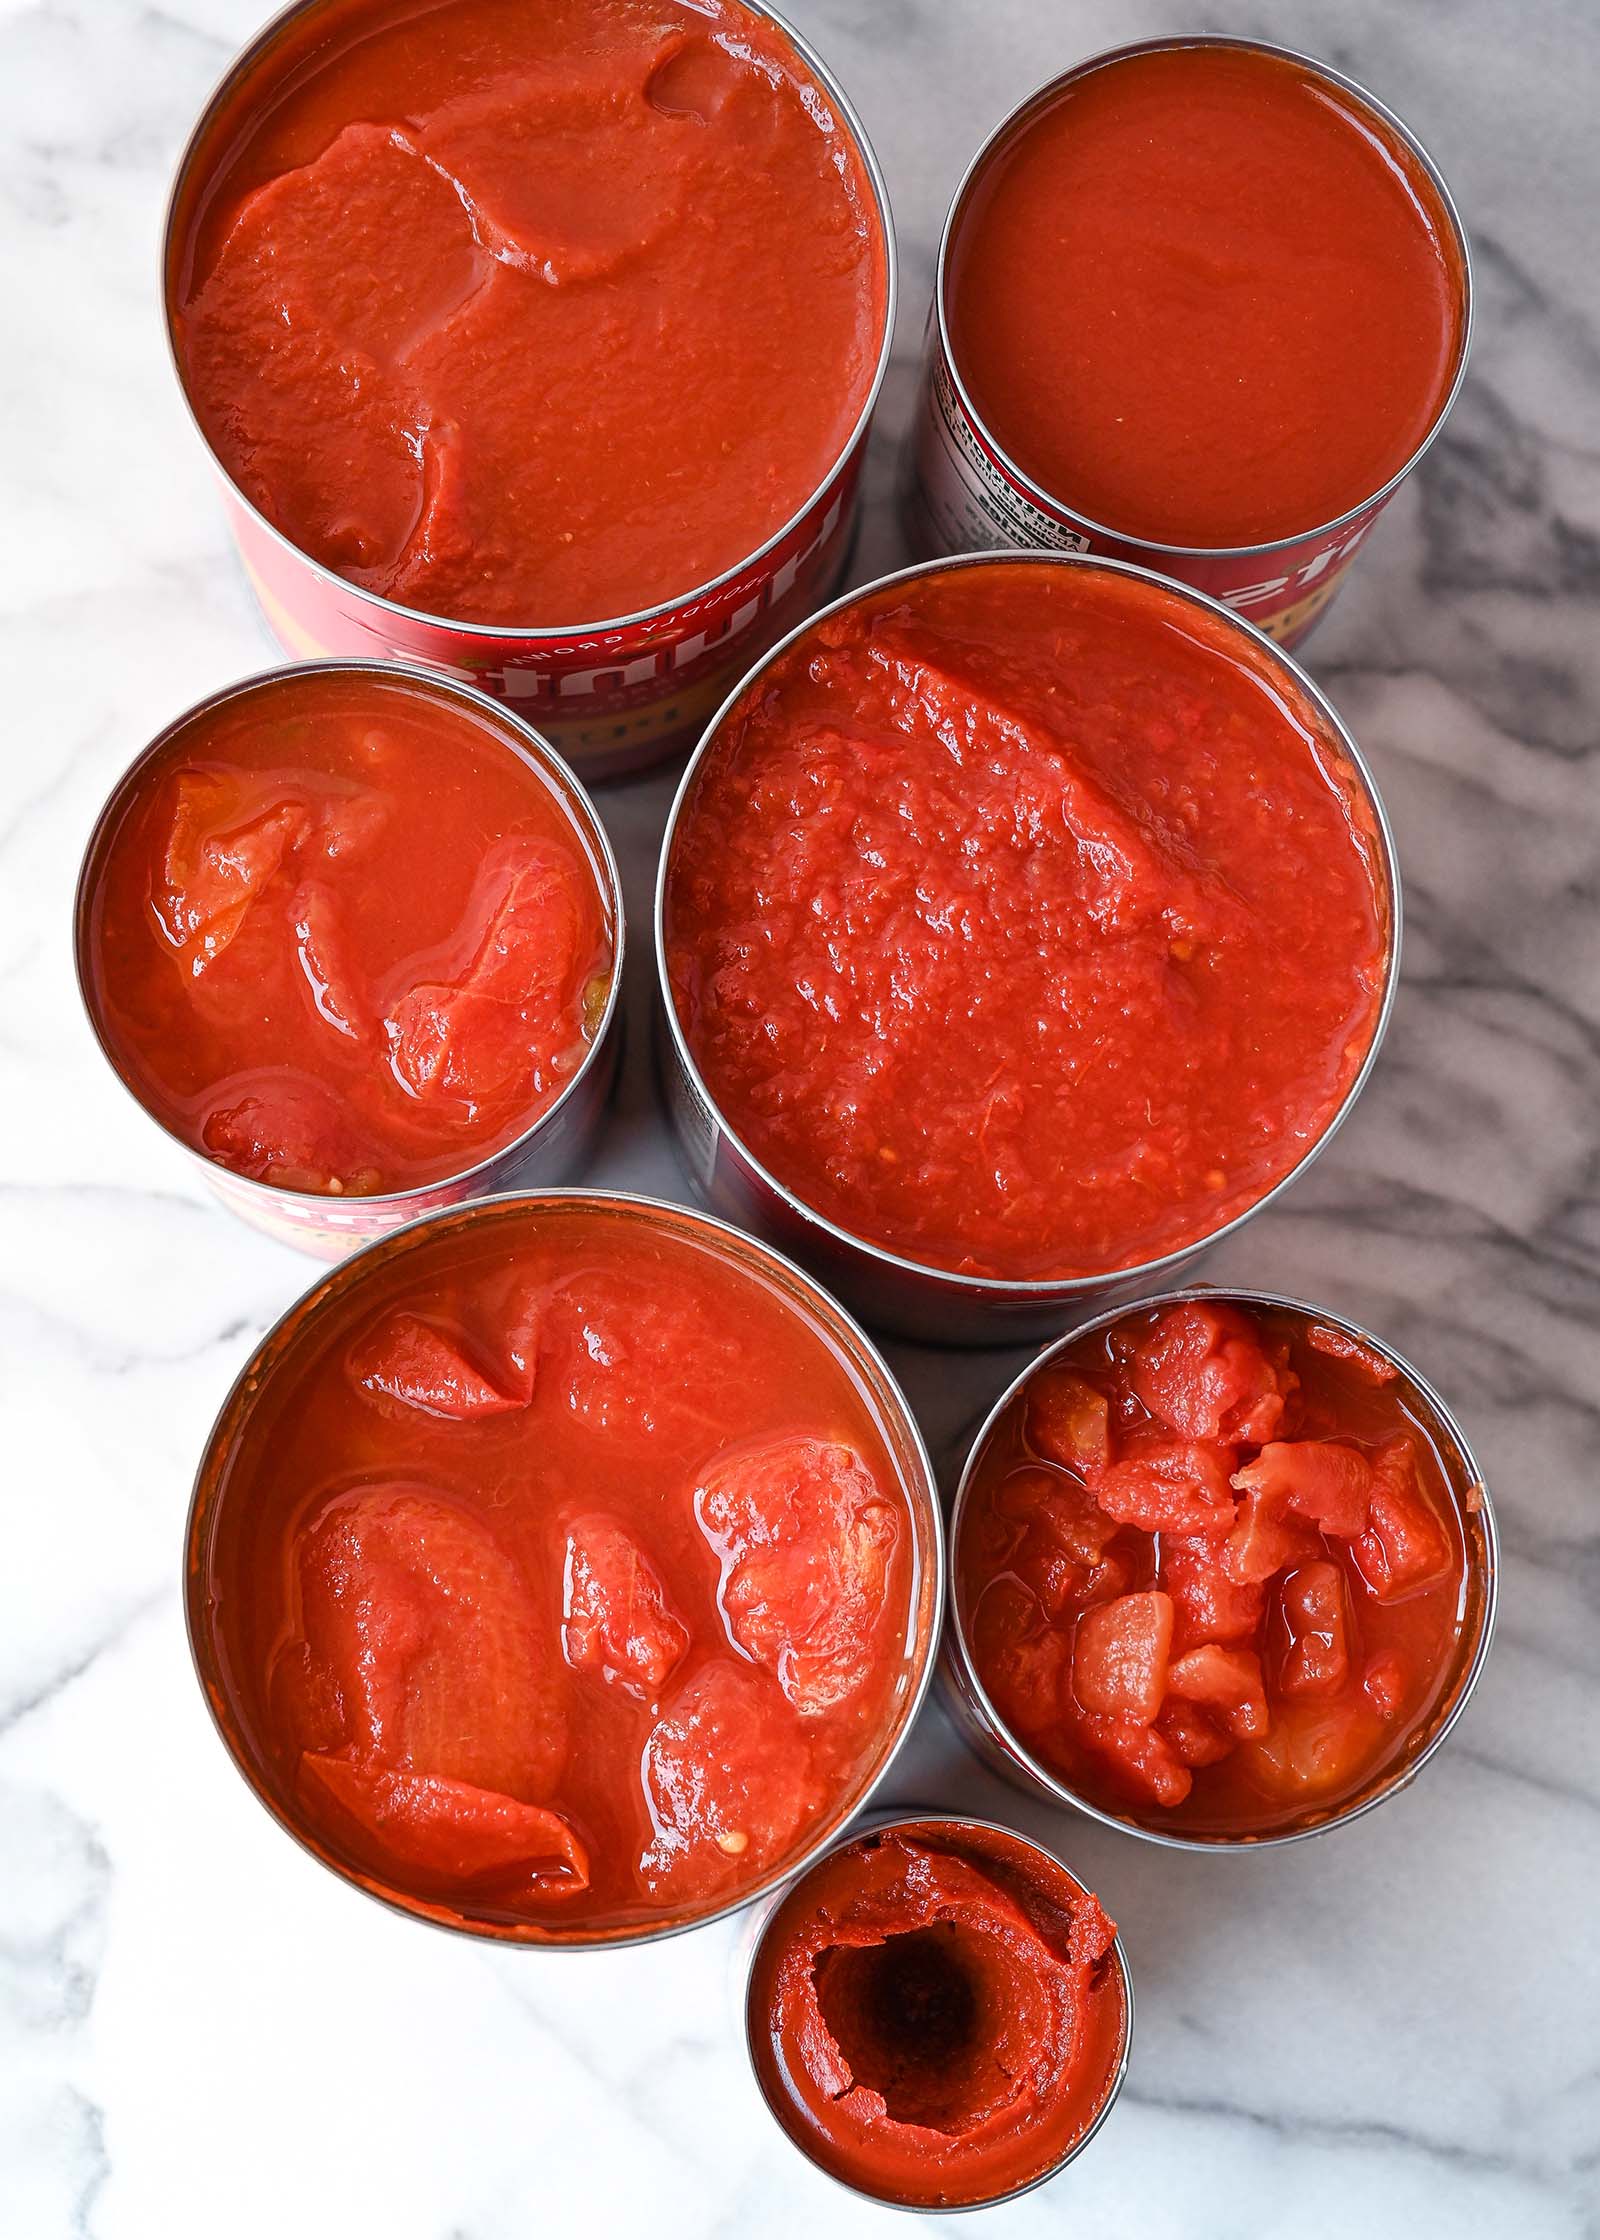 Inside canned tomatoes